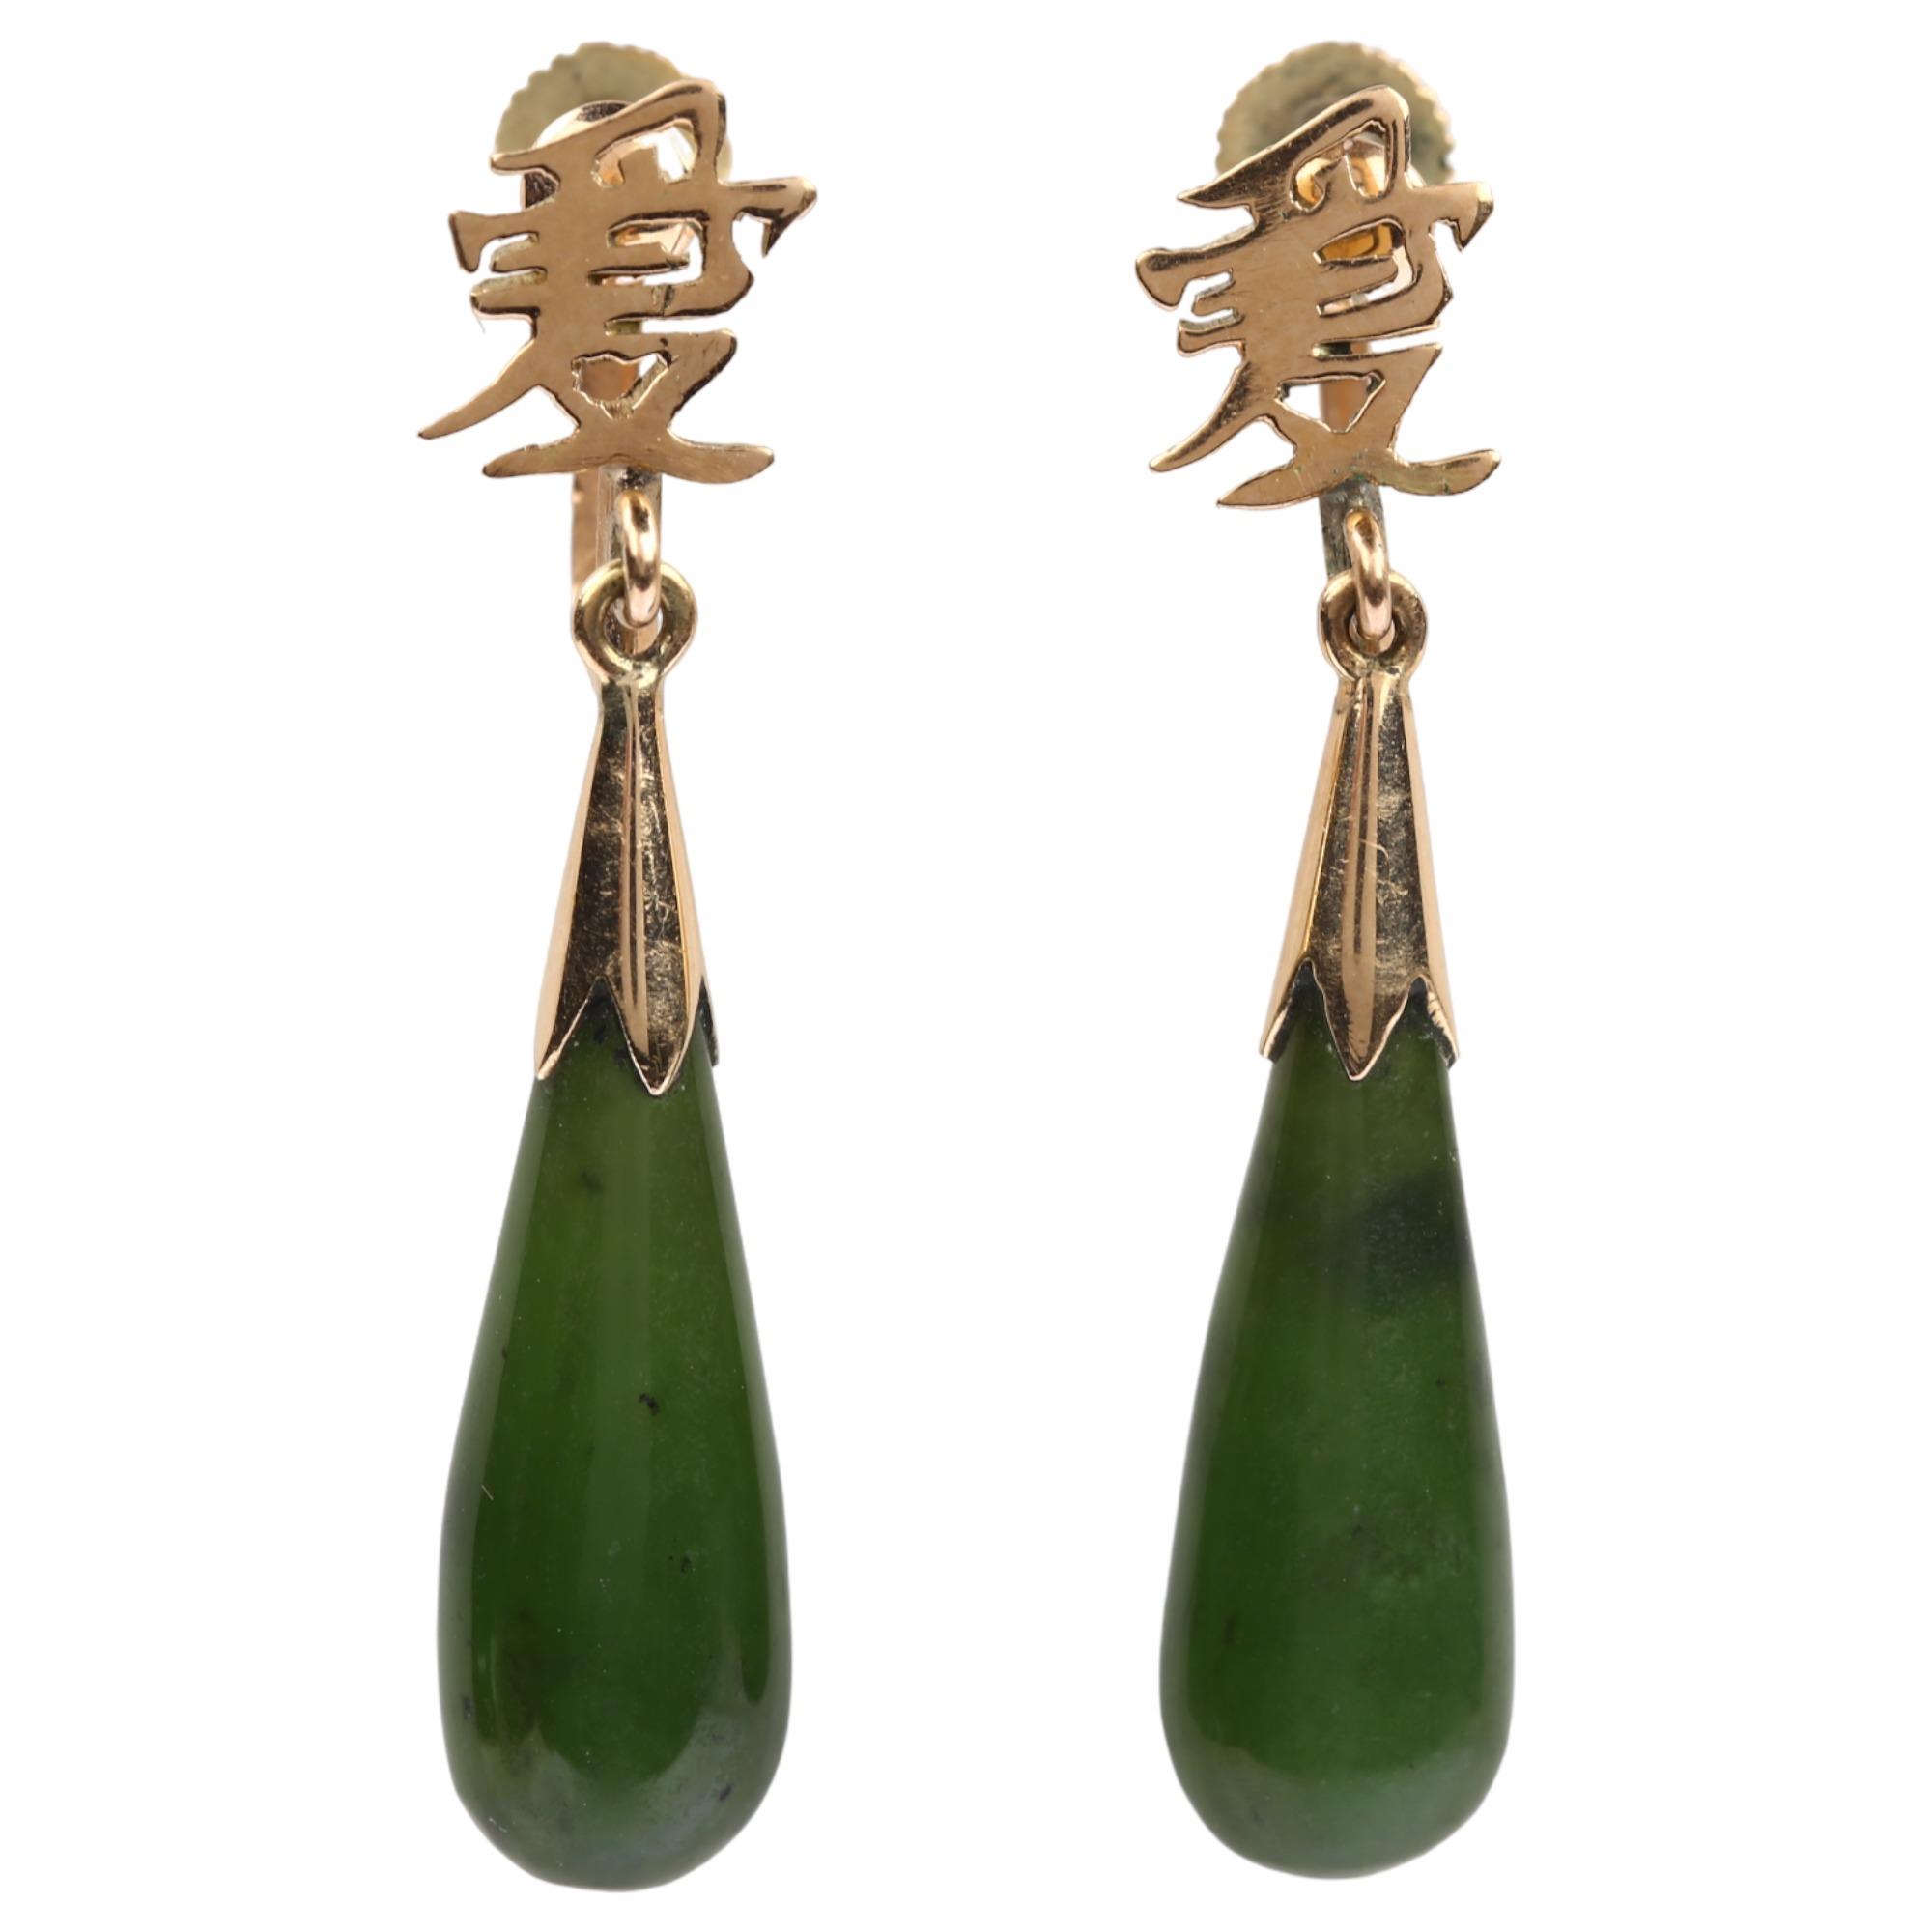 A pair of Chinese 14ct gold nephrite drop earrings, with character mark screw-back fittings, maker's